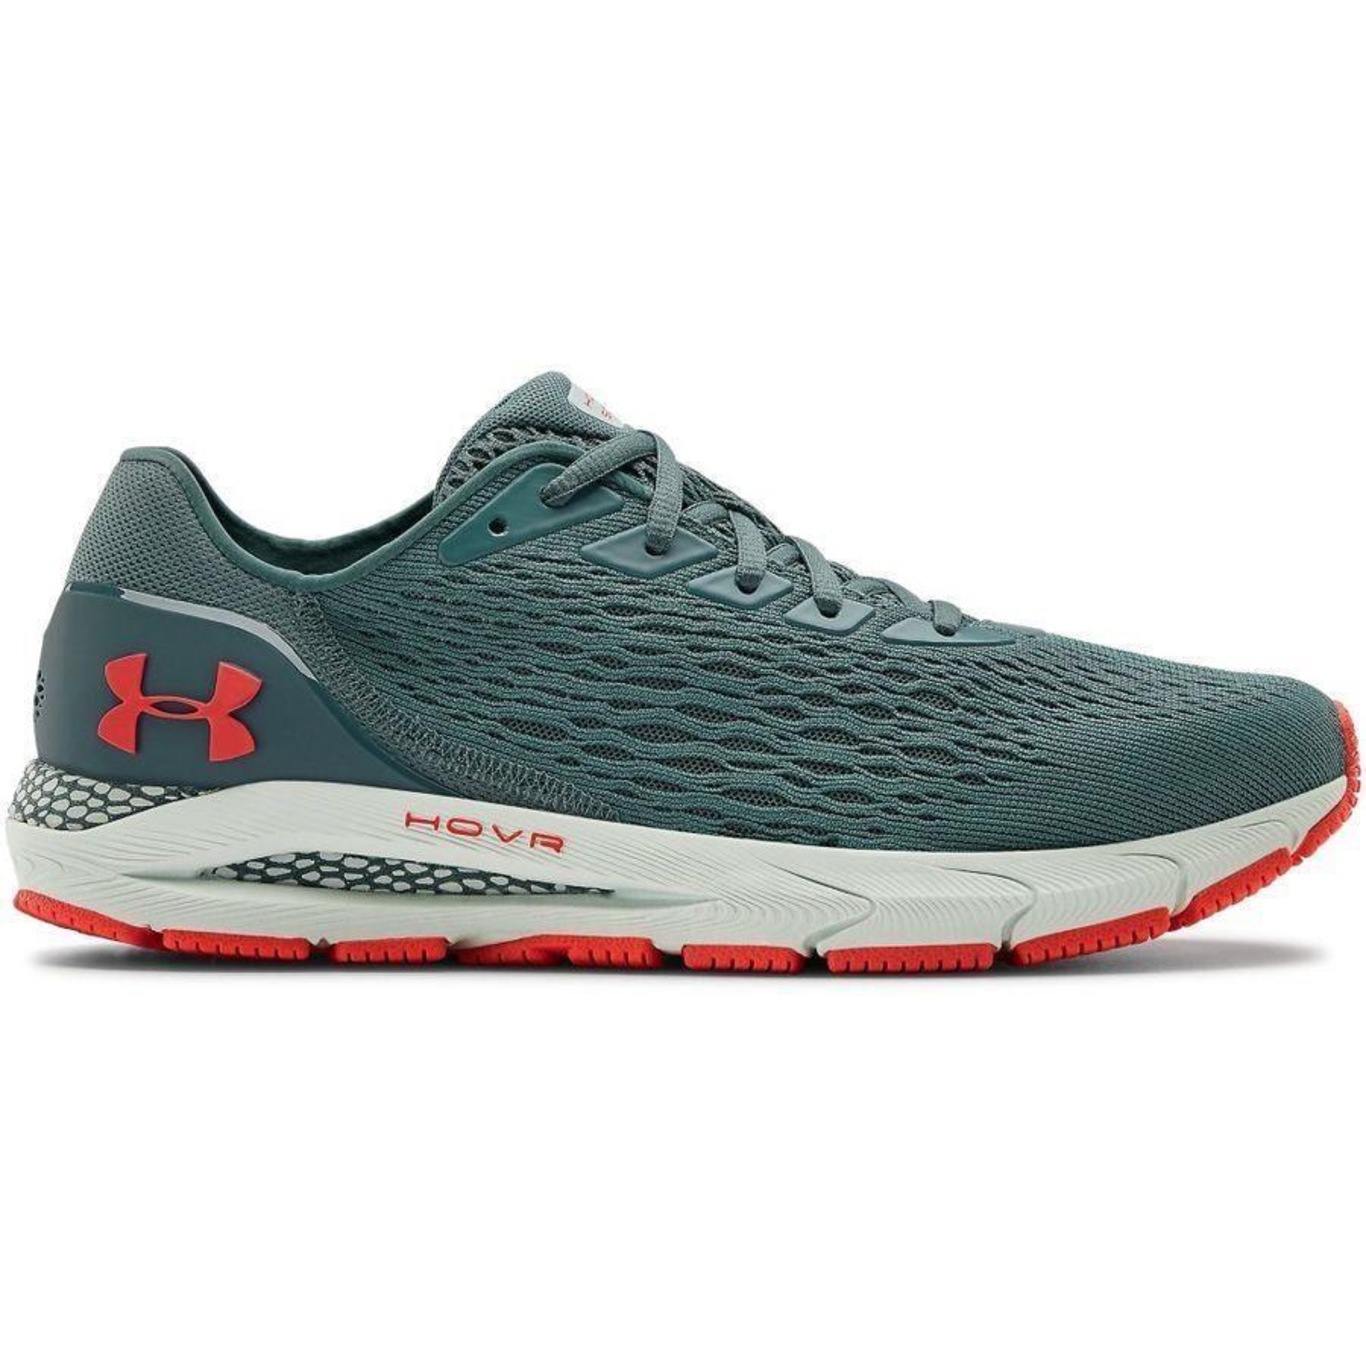 Tênis Under Armour HOVR Sonic 3 - Masculino